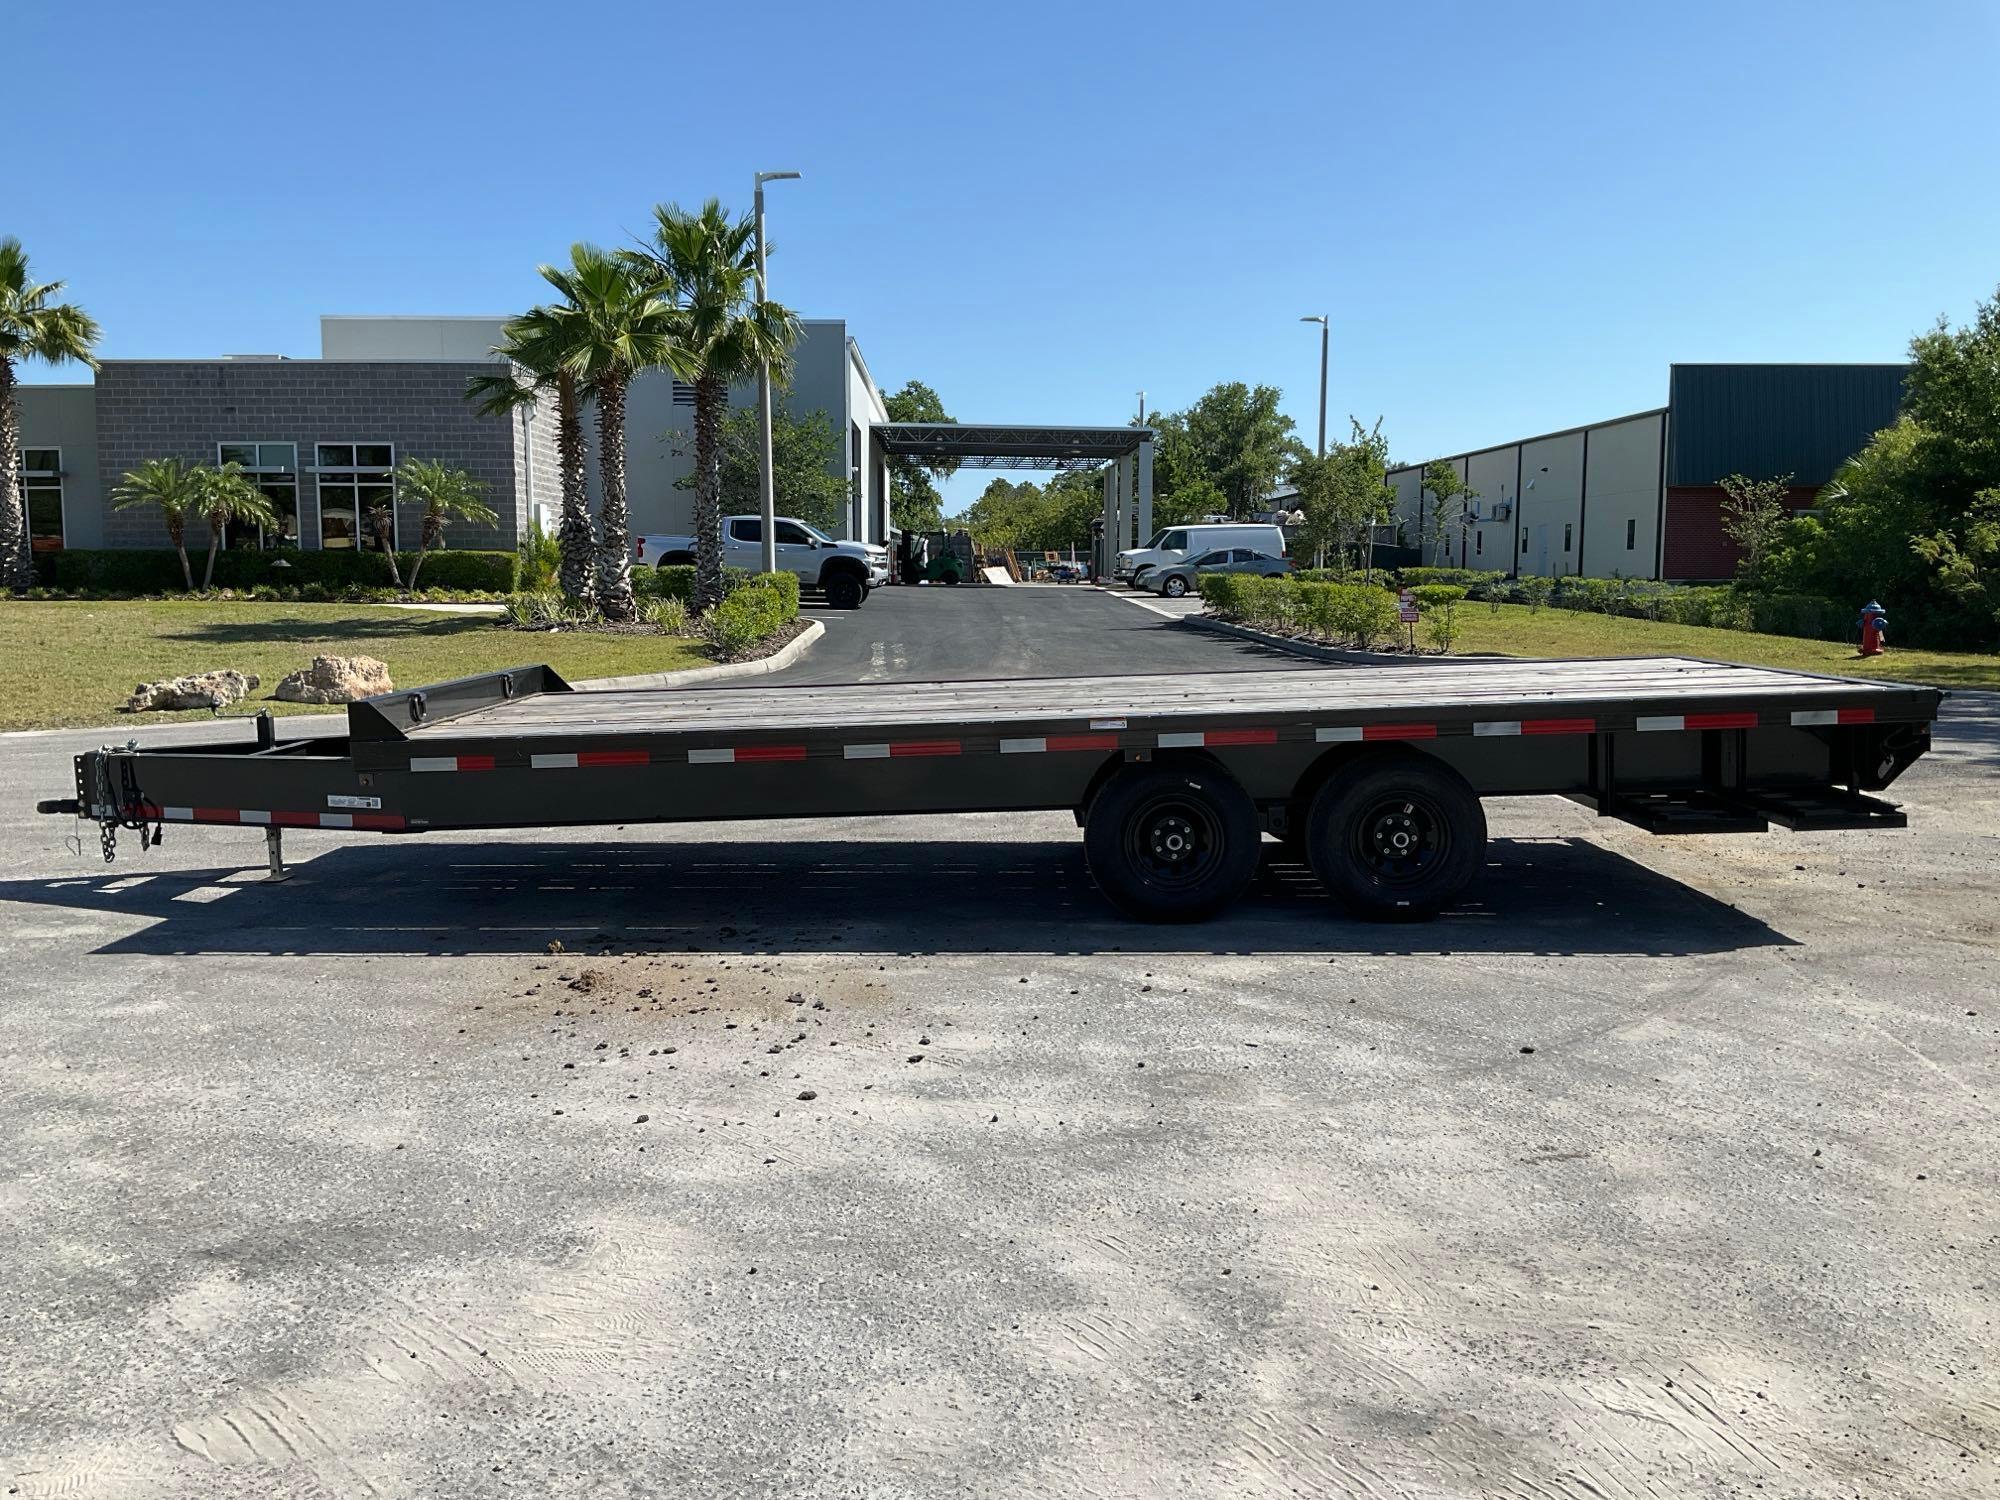 UNUSED 2024 CARRY-ON TRAILER MODEL TRA/REM ZBT100A-20BK-85IR, GVWR...9990, APPROX 20FT DECK LONG,...